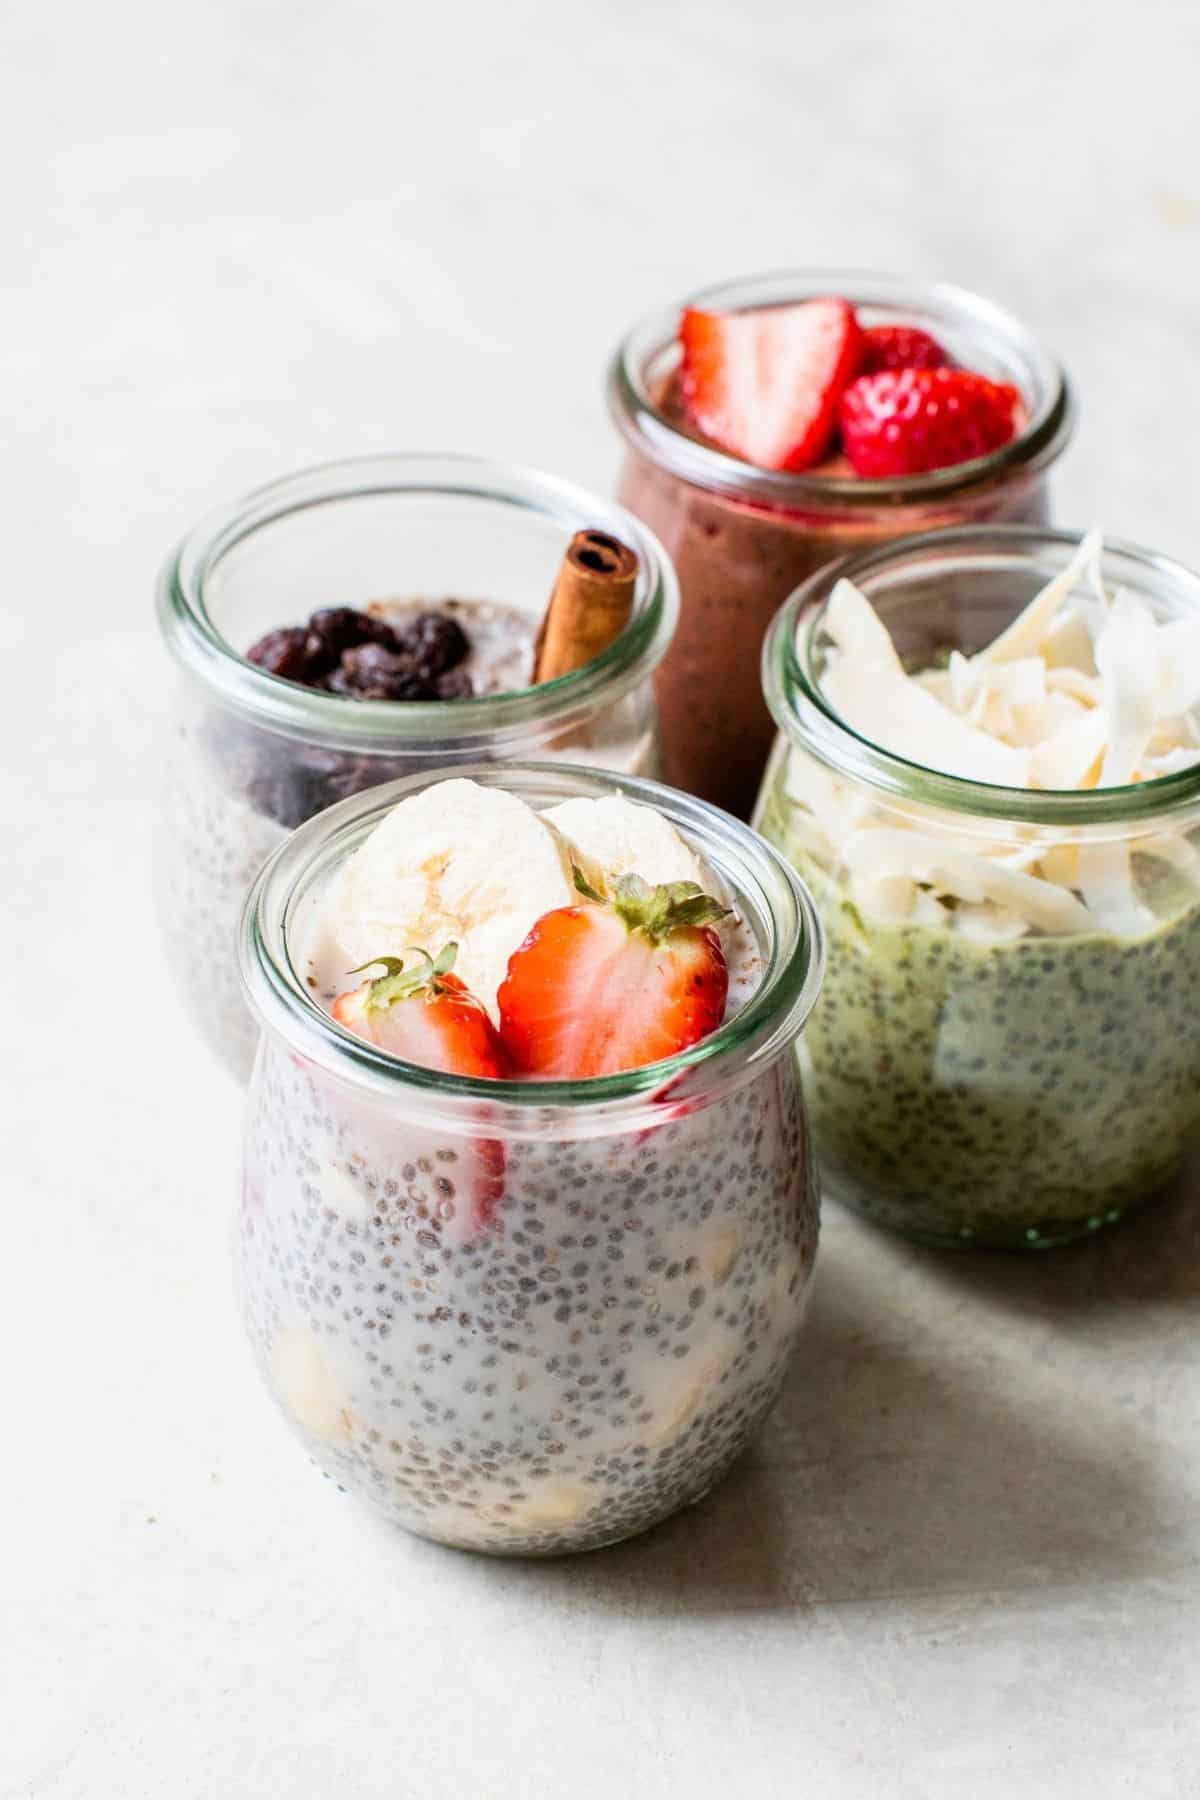 https://cleananddelicious.com/wp-content/uploads/2019/12/chia-seed-pudding-1.jpg